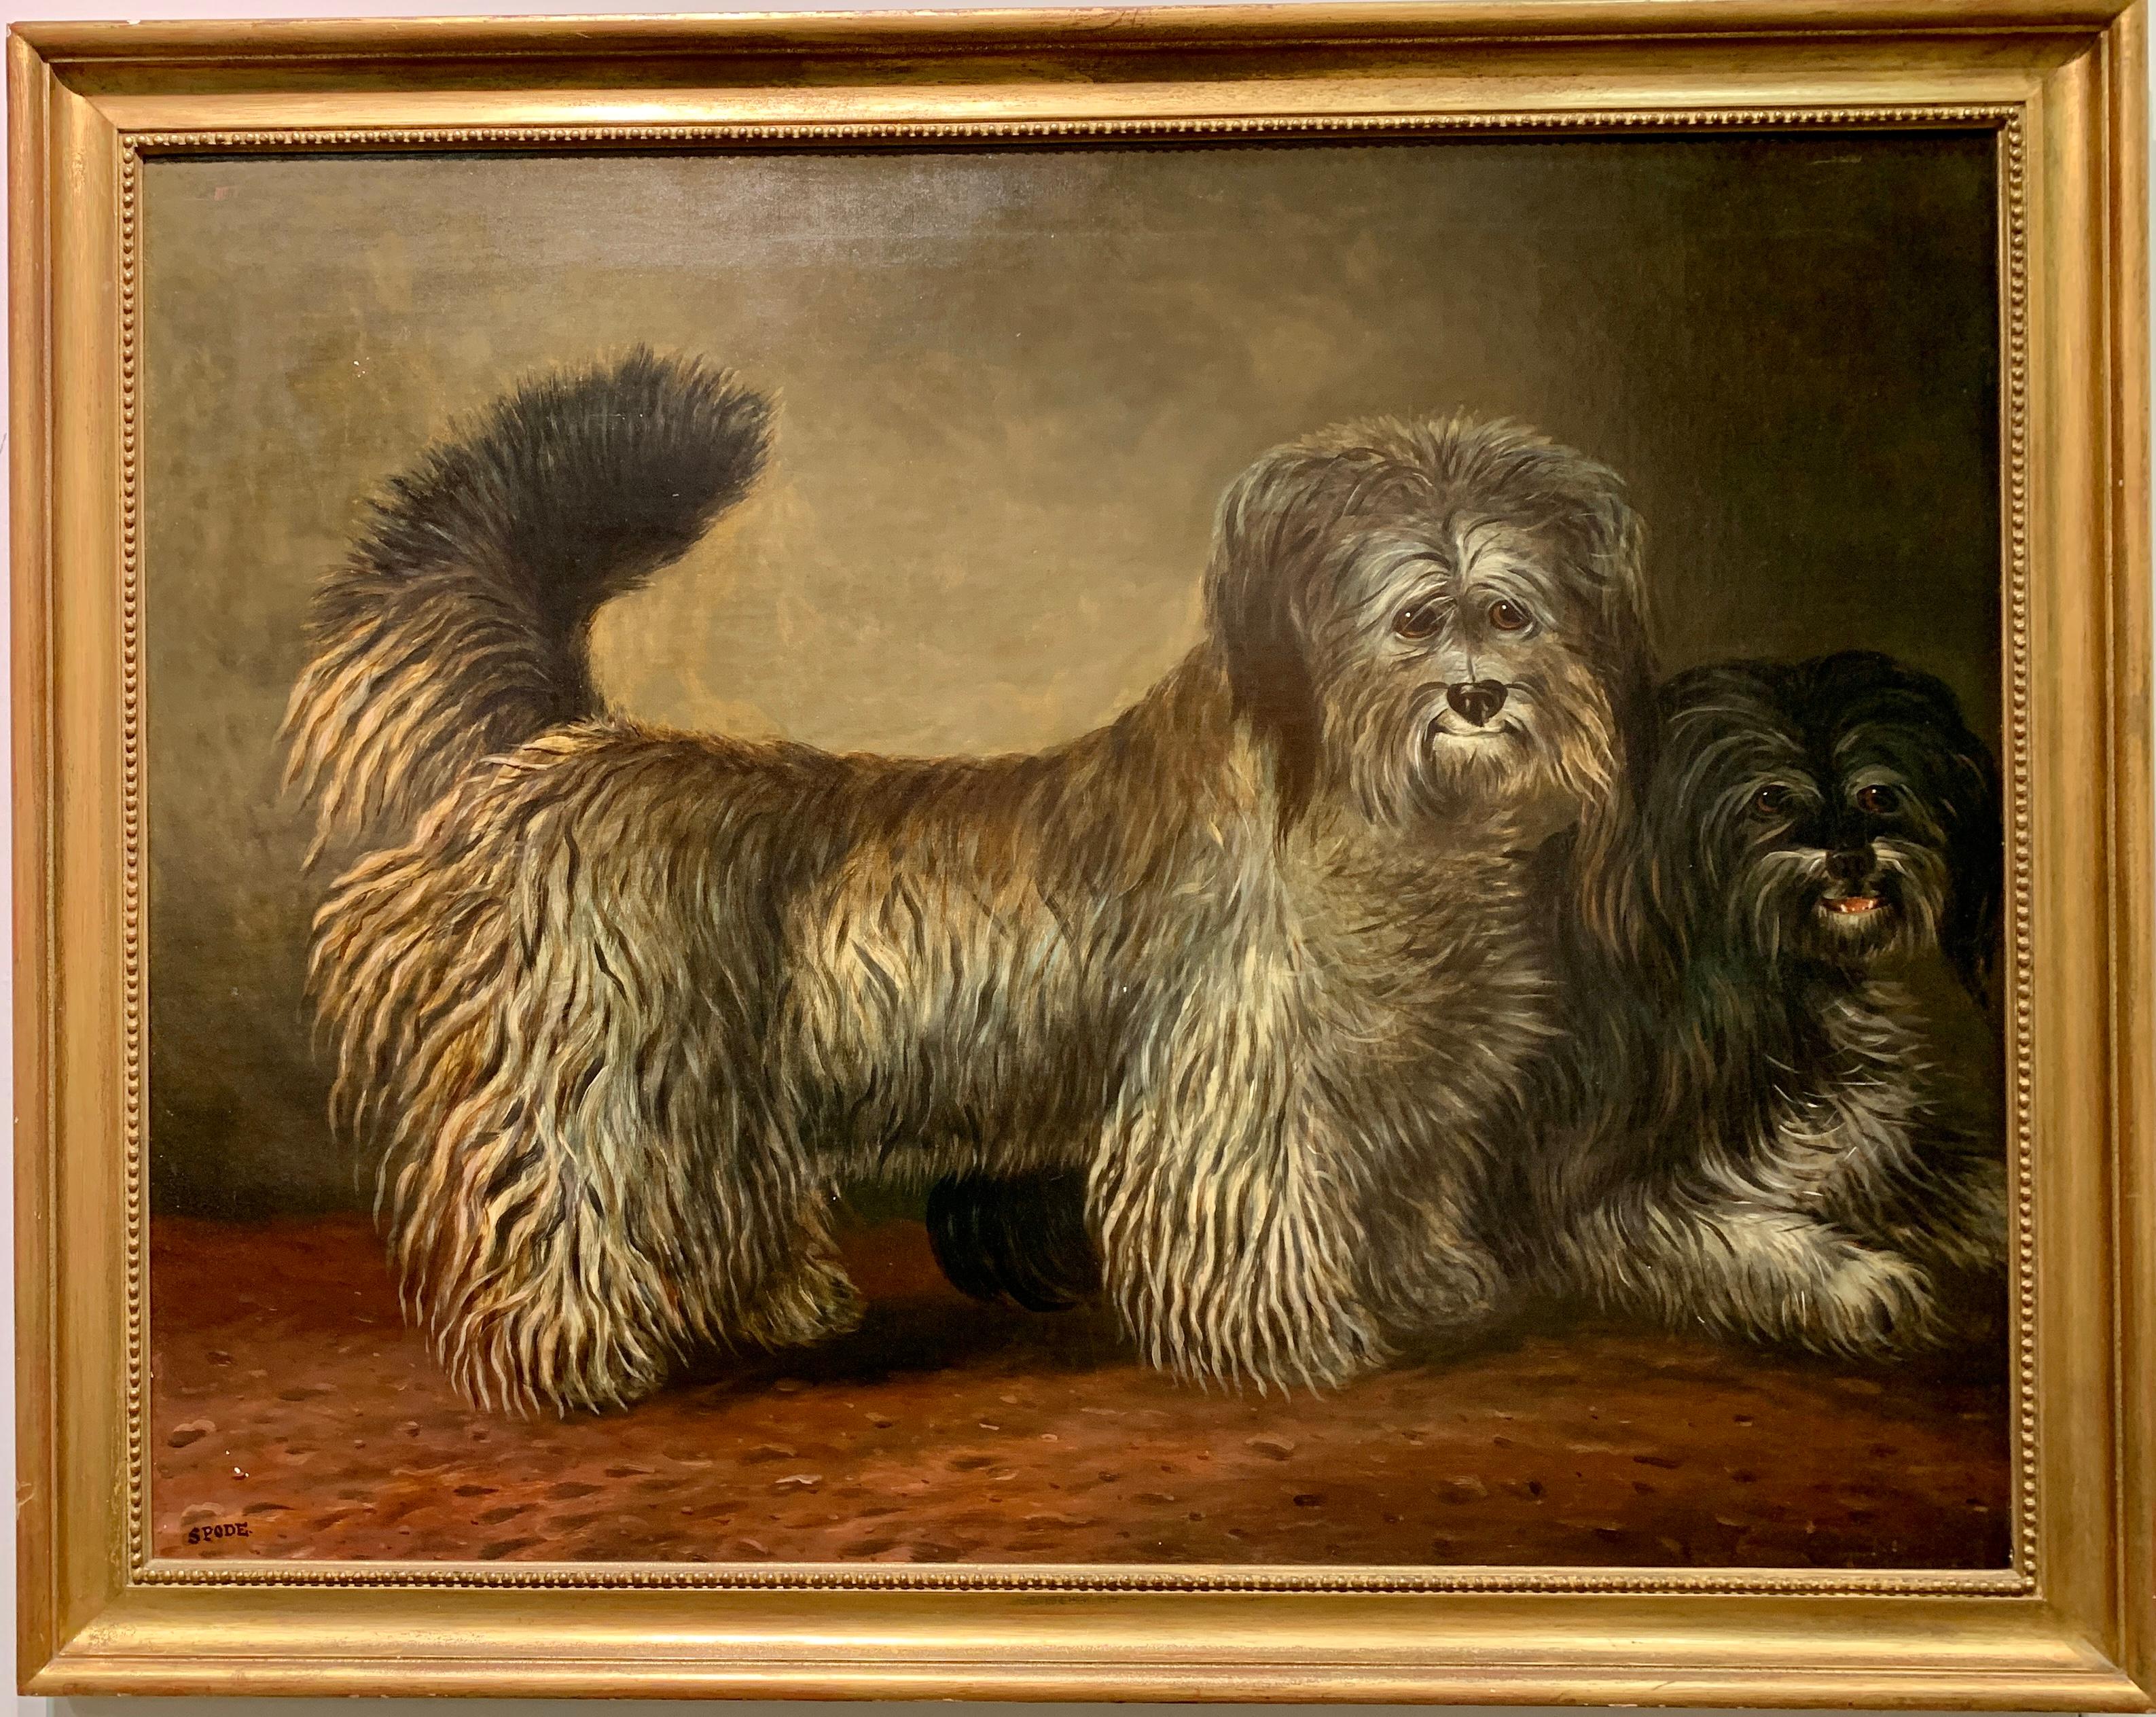 19th century Irish or English Antique portrait of two dogs, waterdogs - Painting by Sam Spode